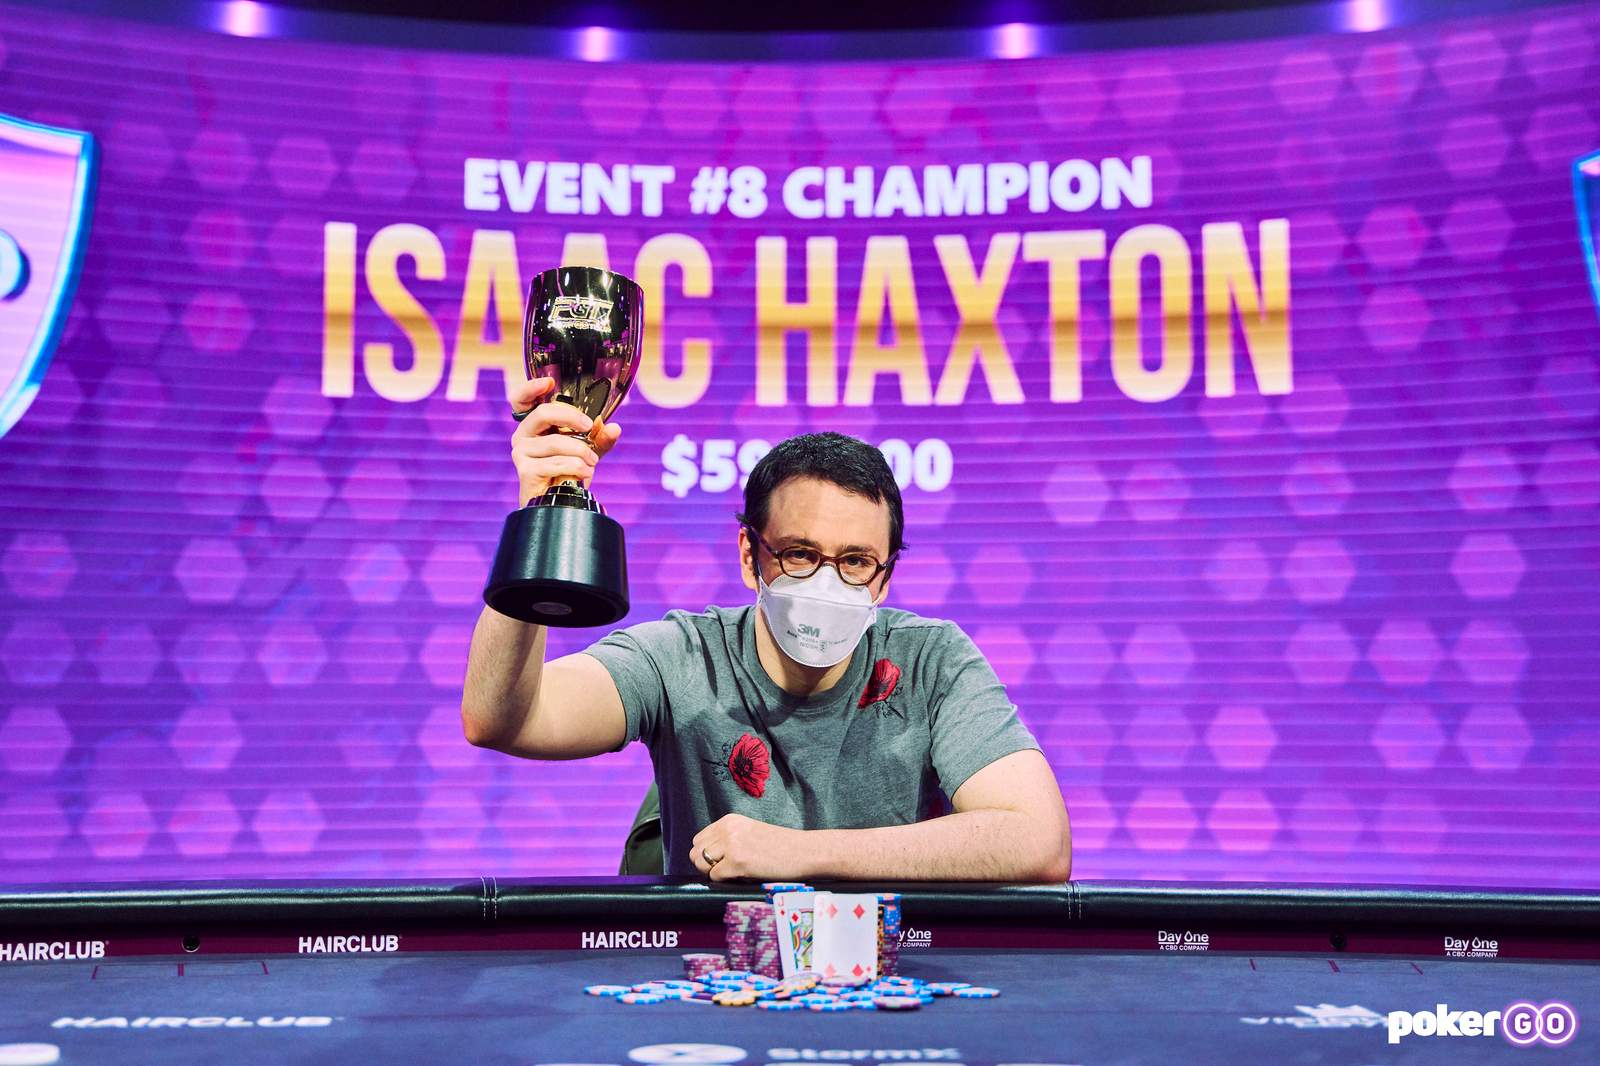 Isaac Haxton Wins PokerGO Cup Event #8 for $598,000